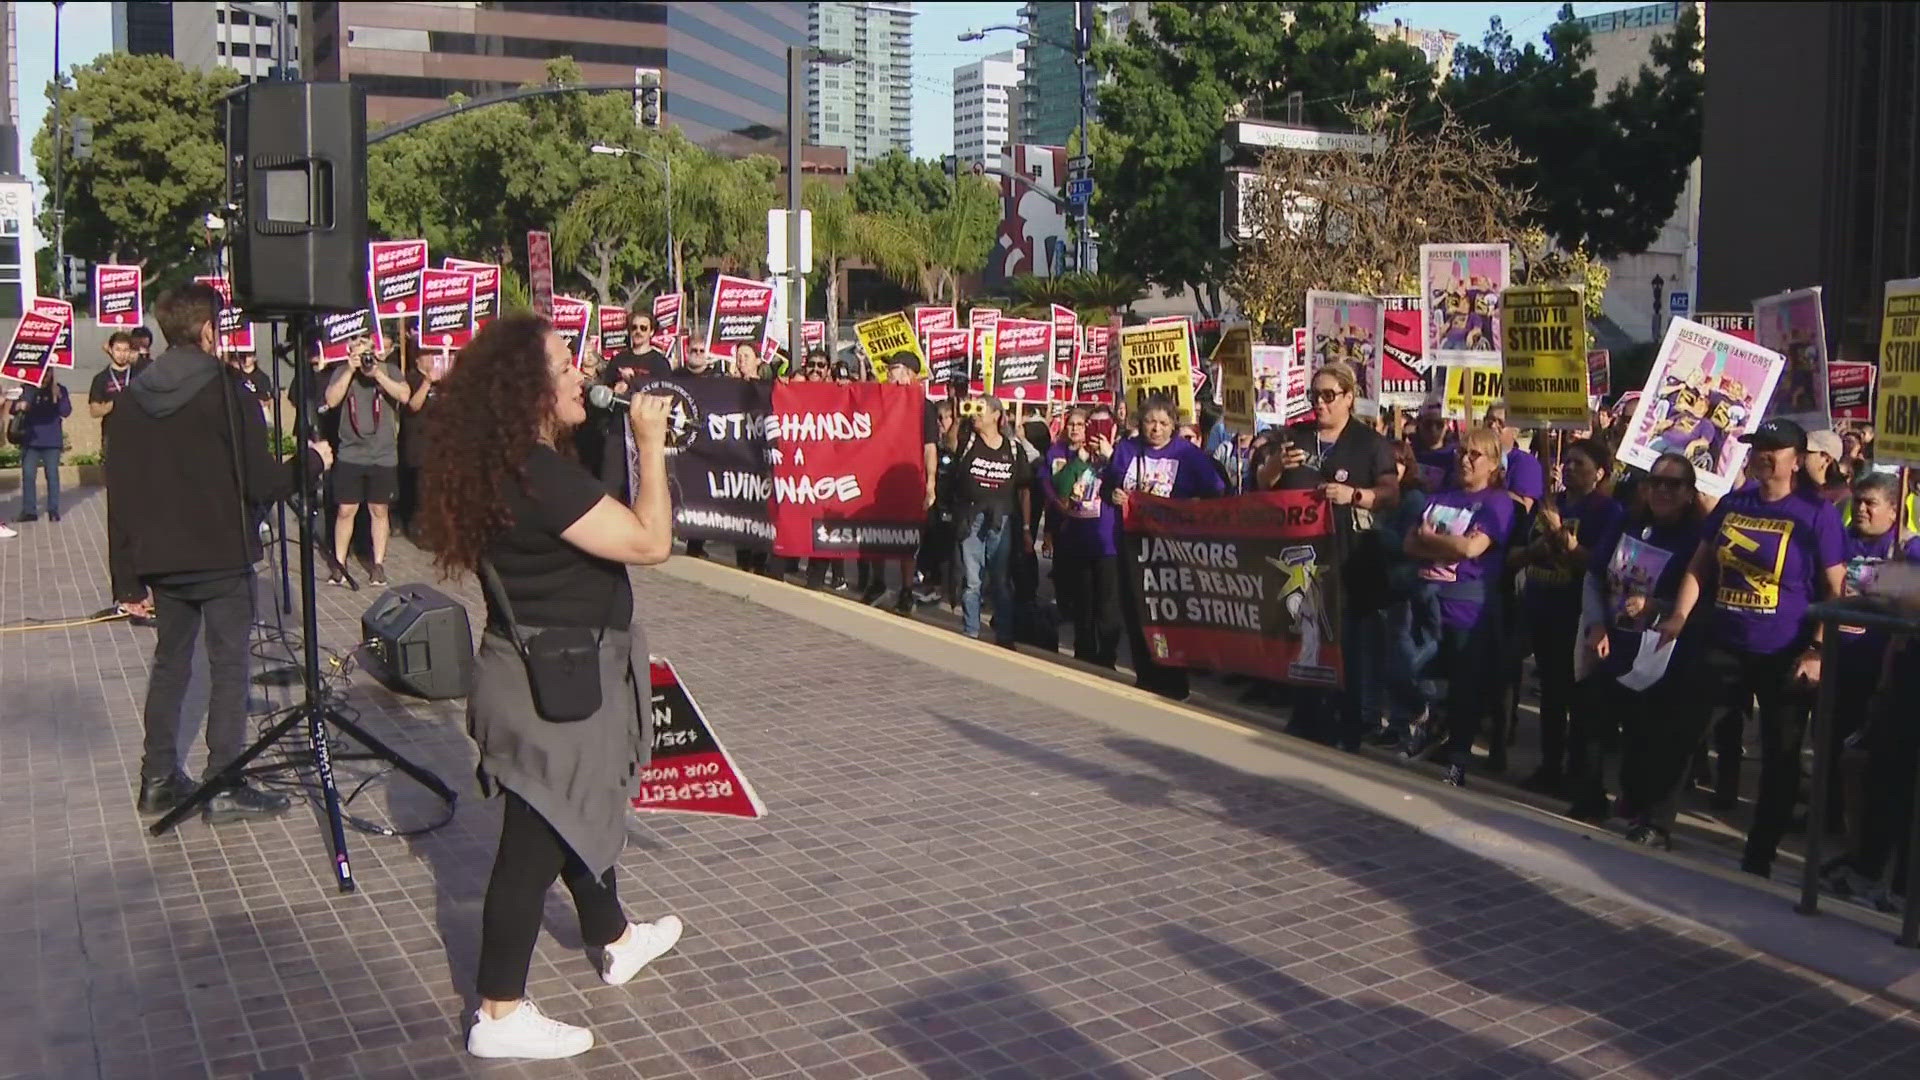 Hundreds of San Diego's service workers took part in the larger International Workers' Day demonstrations, demanding fair pay and better work conditions.